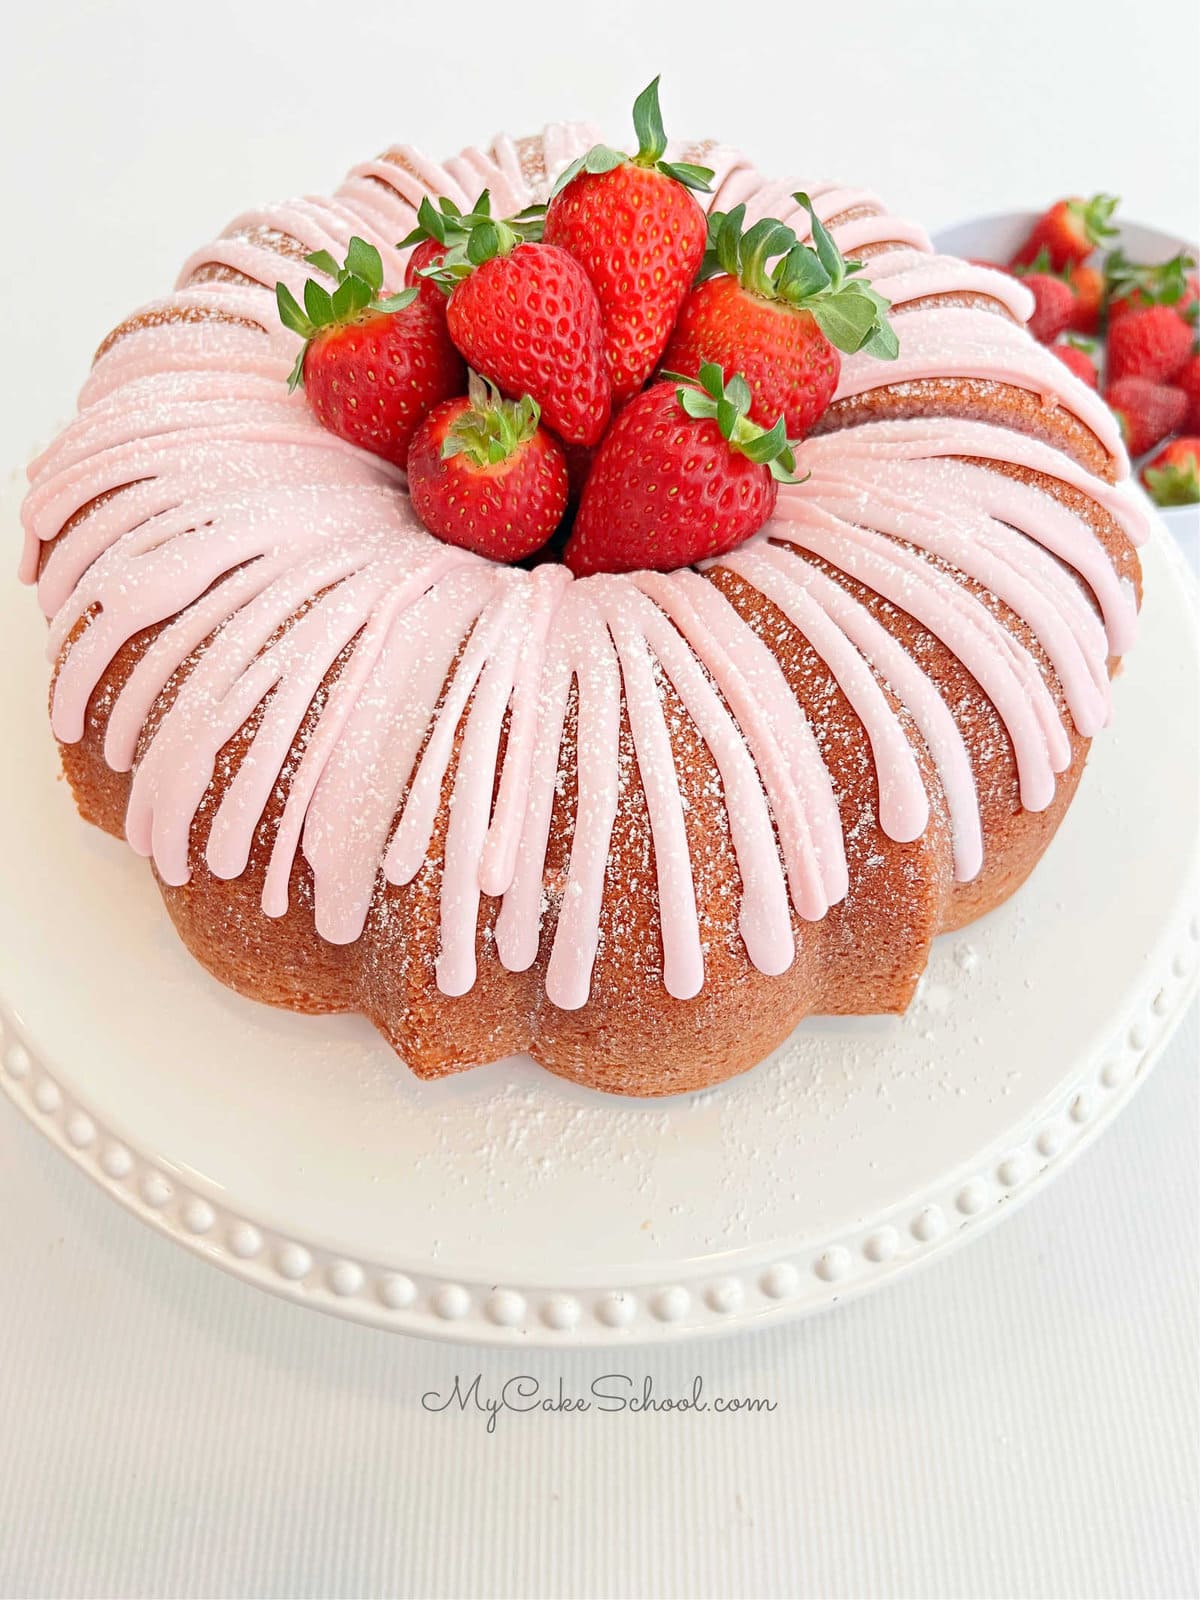 Strawberry Bundt Cake topped with simple strawberry glaze and fresh strawberries